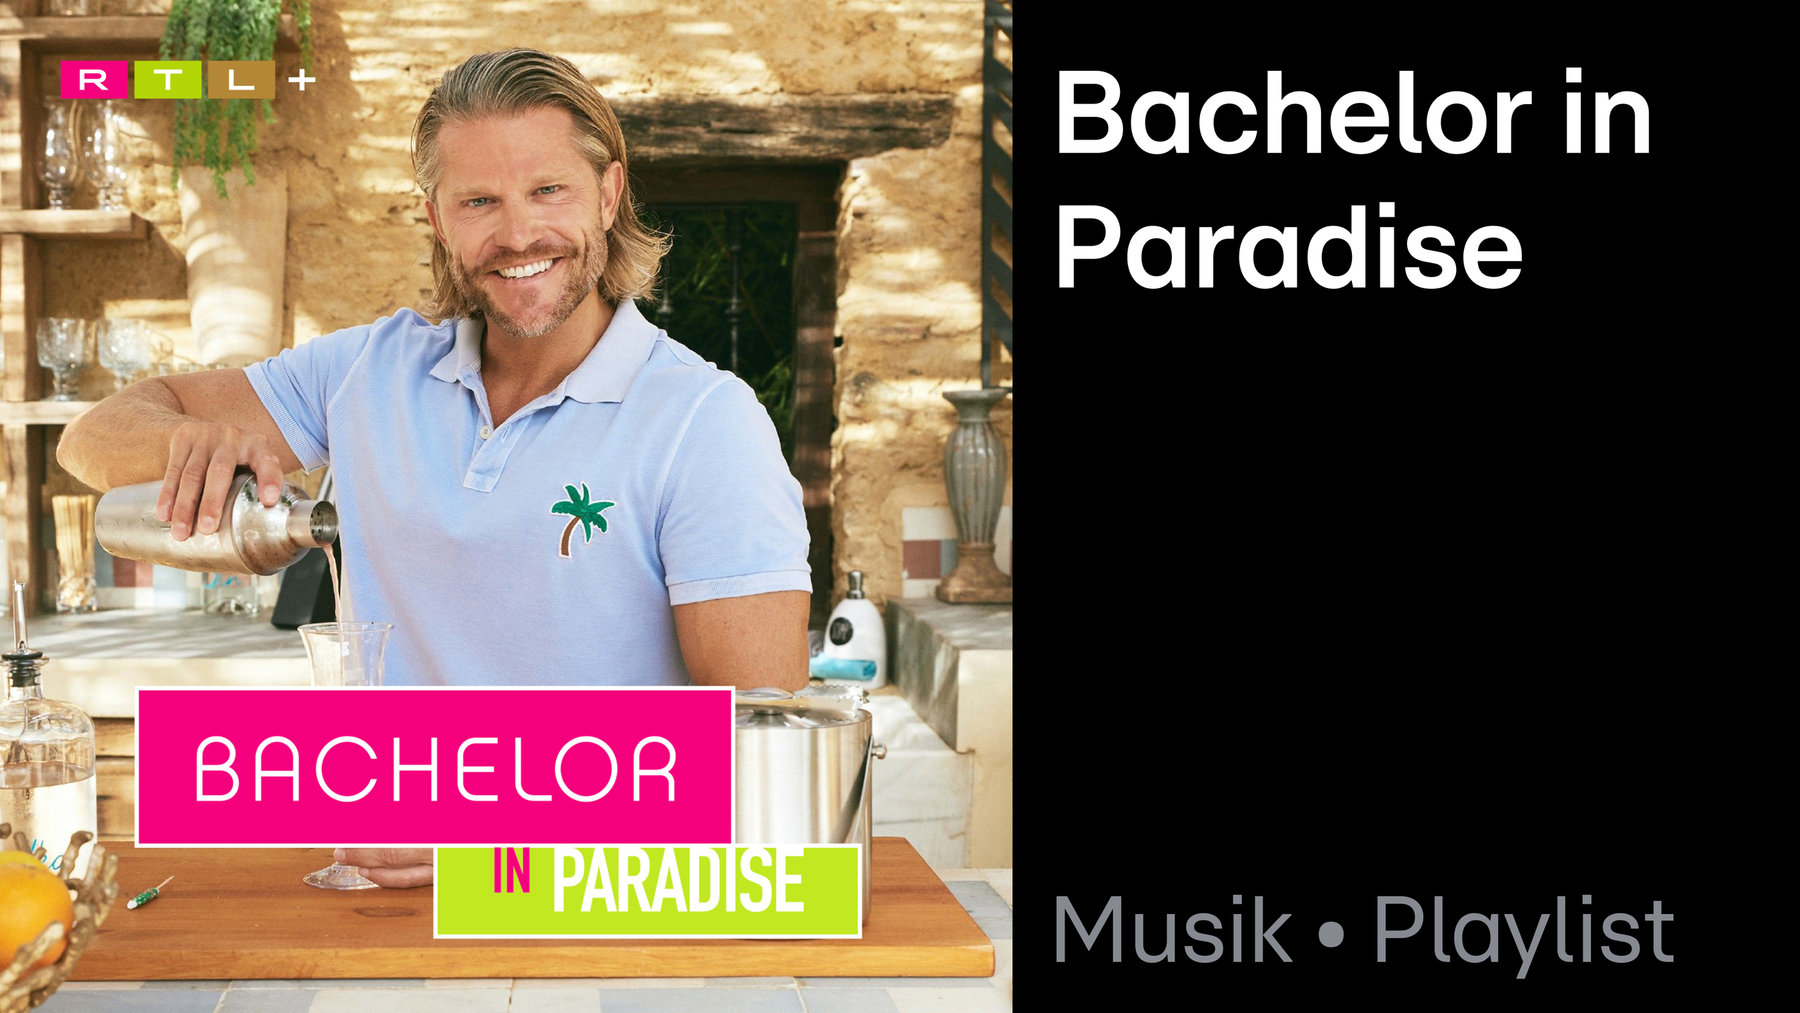 Bachelor in Paradise Playlist